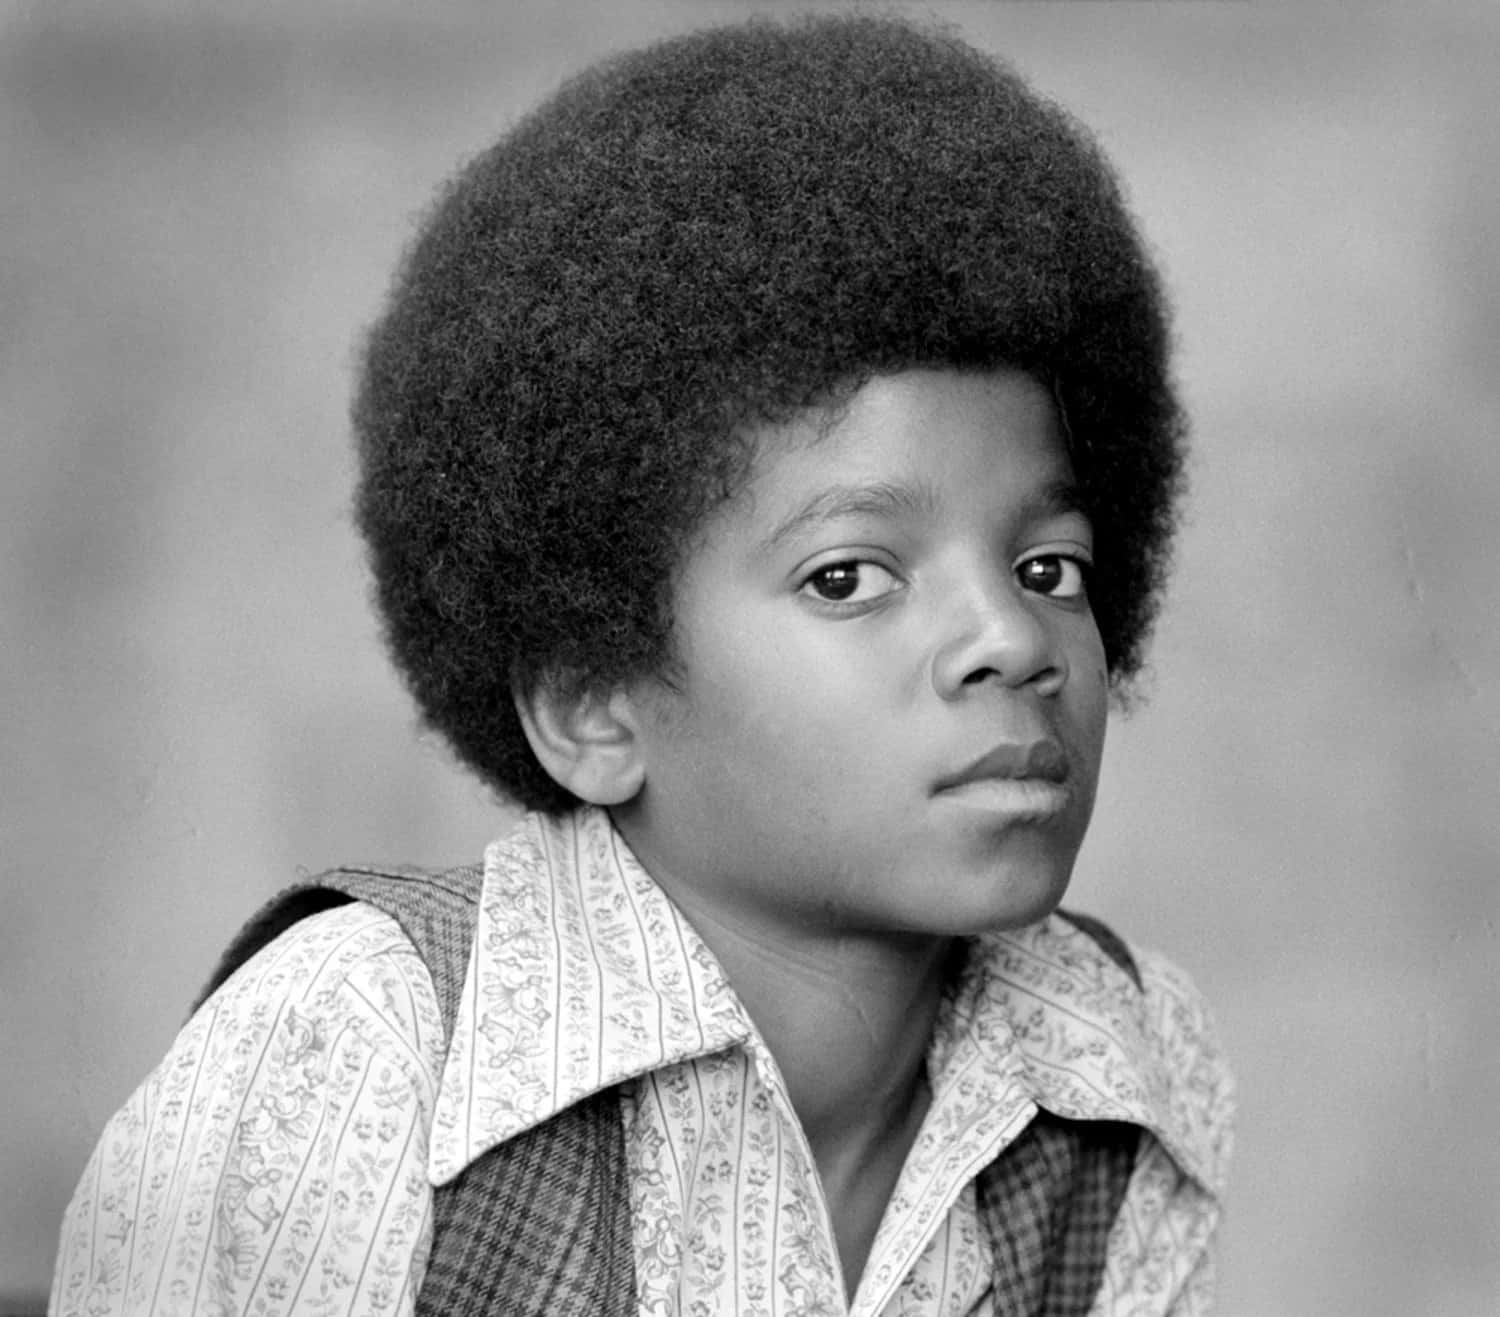 Young Michael Jackson performing live